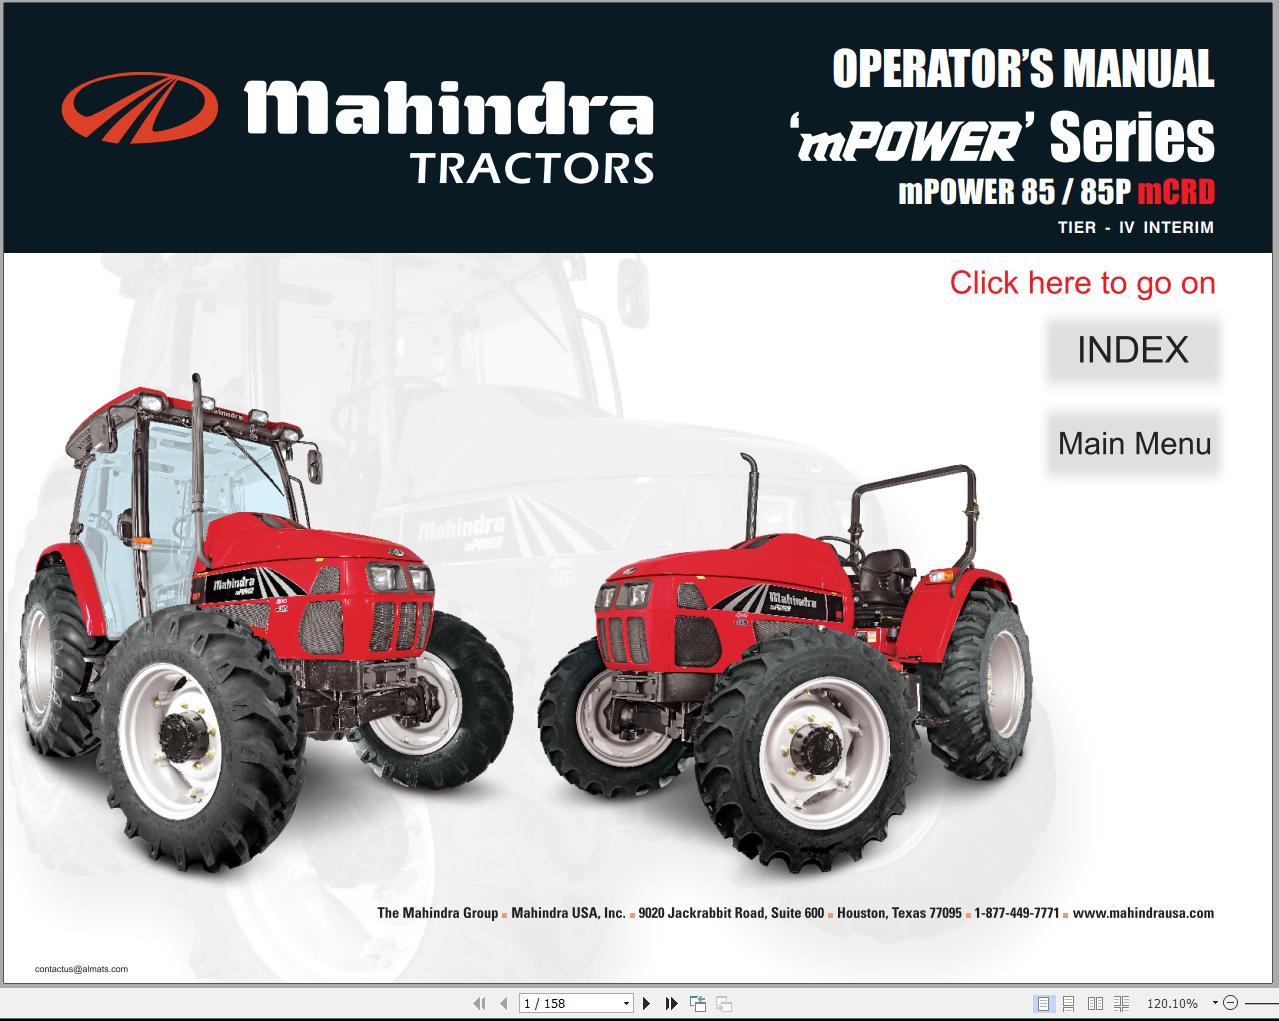 Mahindra Tractor mPOWER Series 85 85P mCRD Full Operator Manual Fast Download